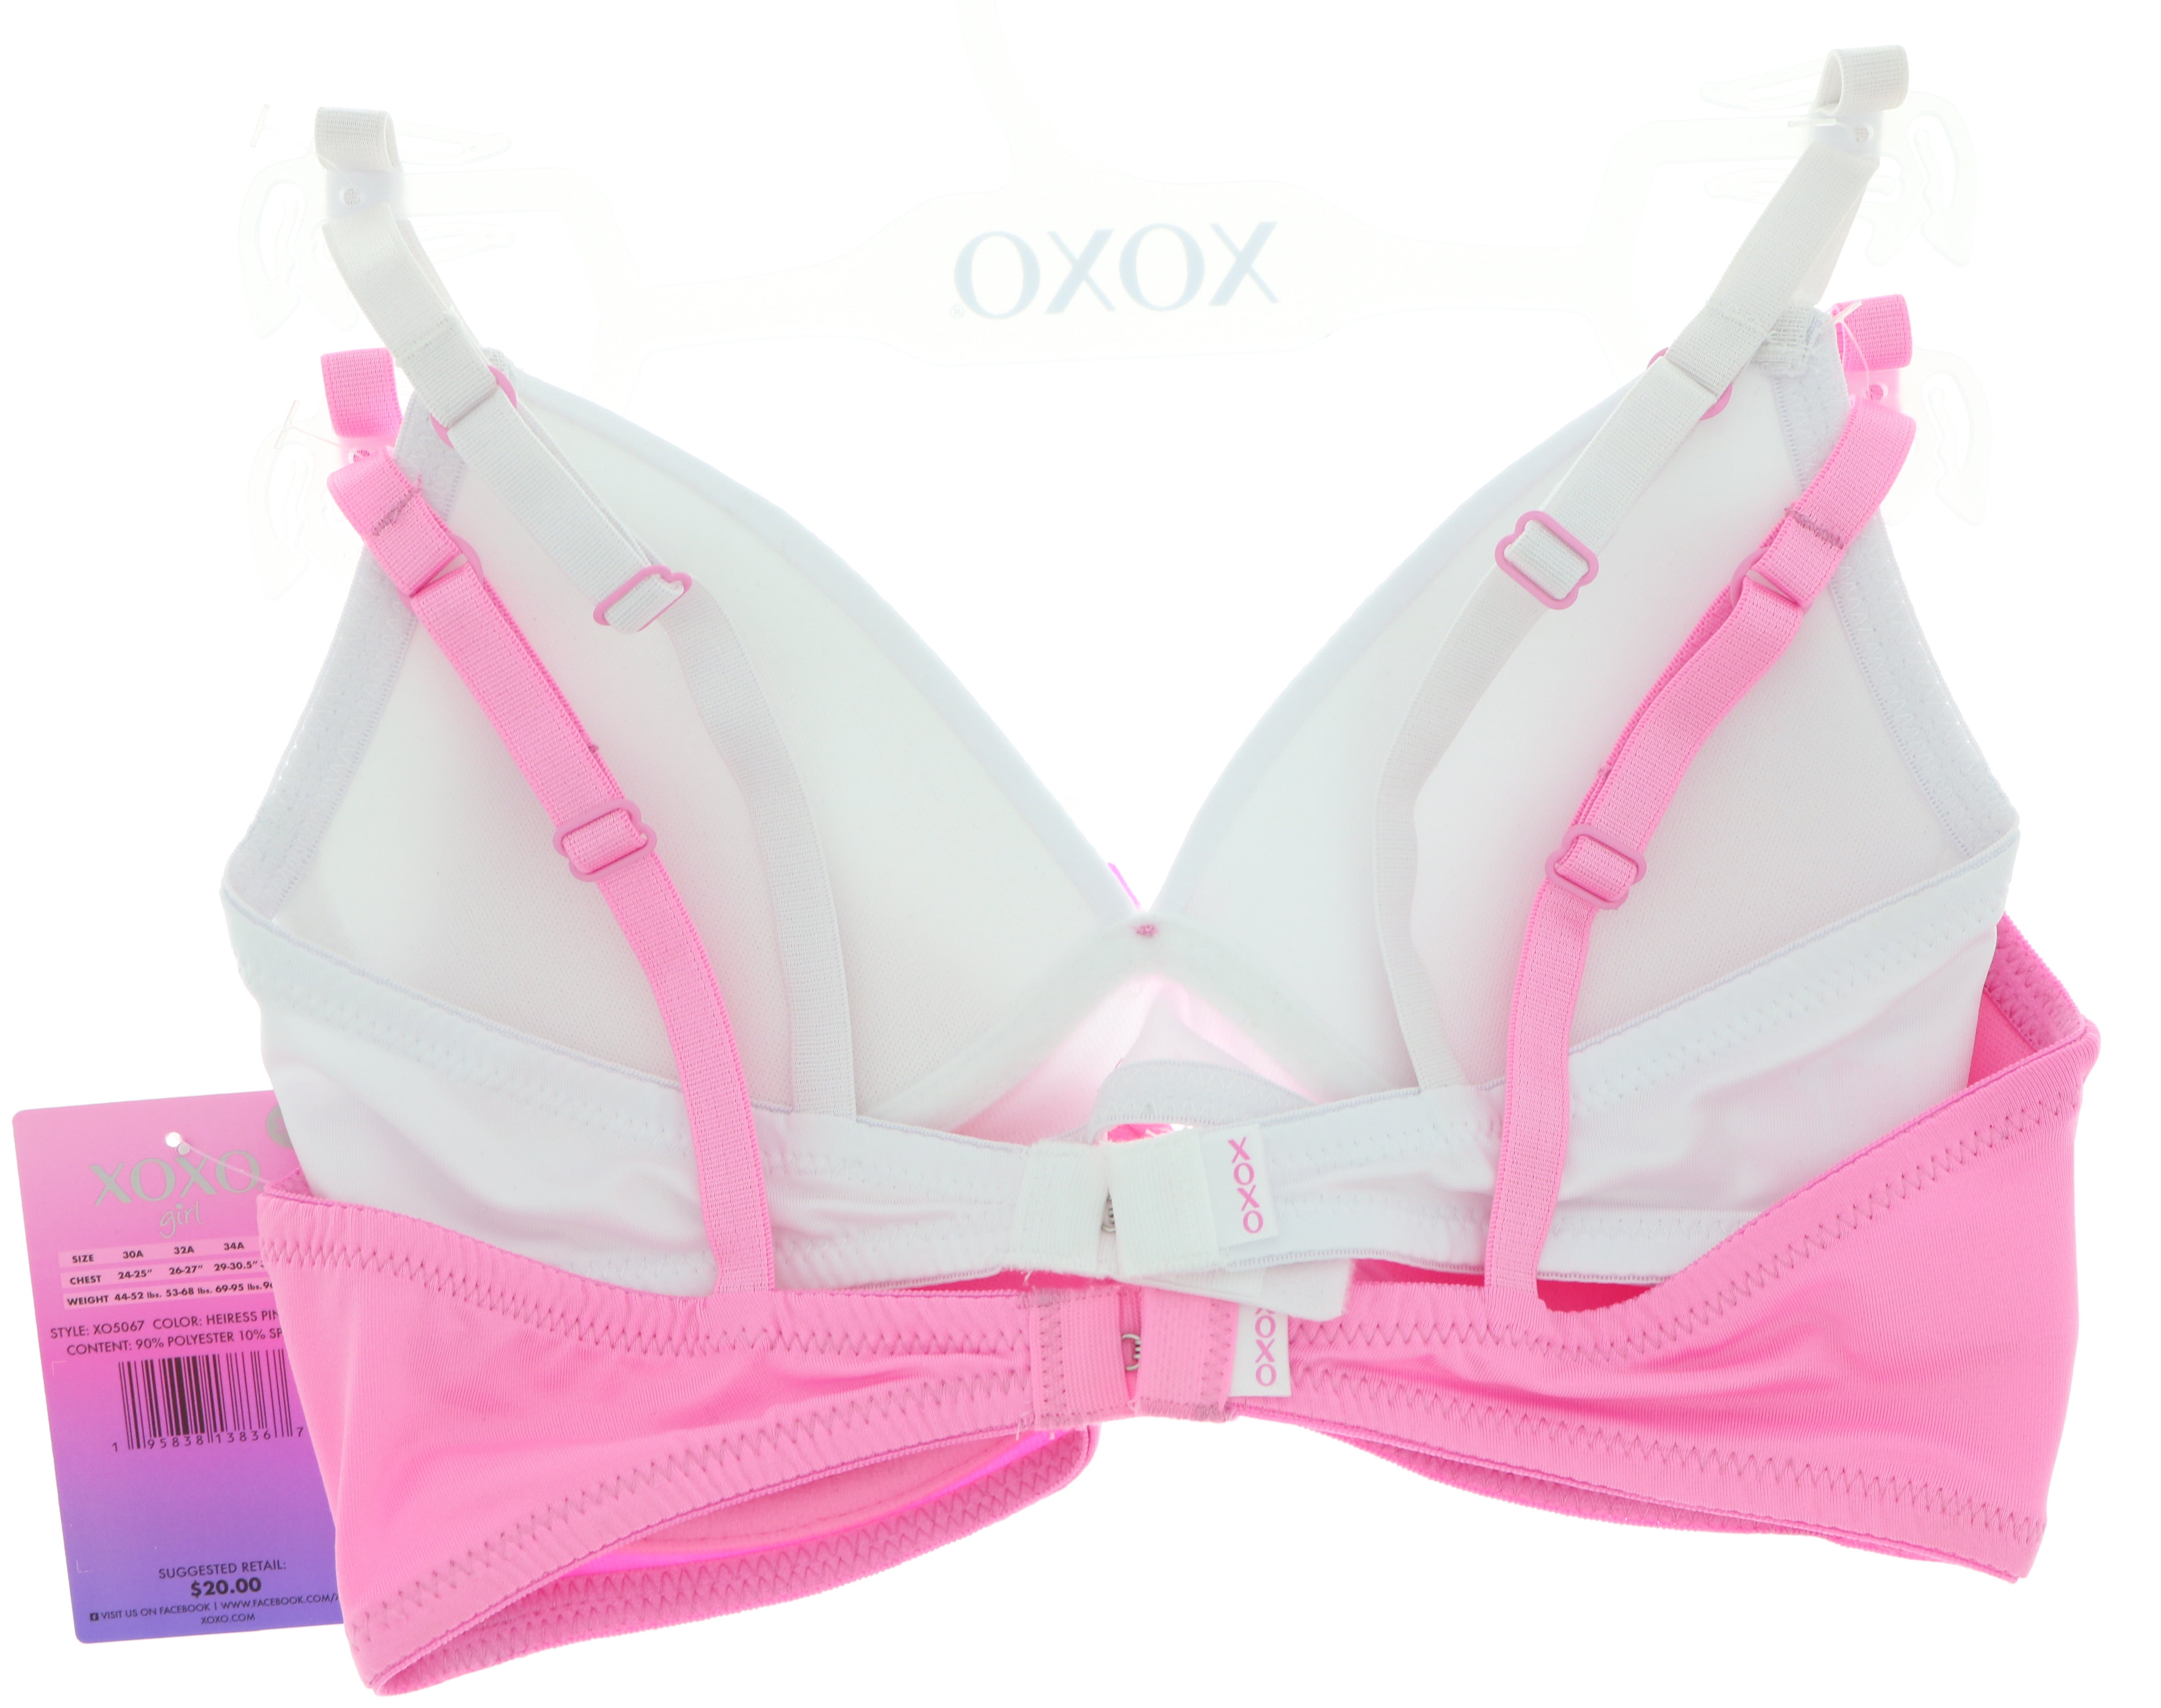 XOXO Tie Dye Push Up Bra 34C Pink Size 34 C - $19 (24% Off Retail) - From L